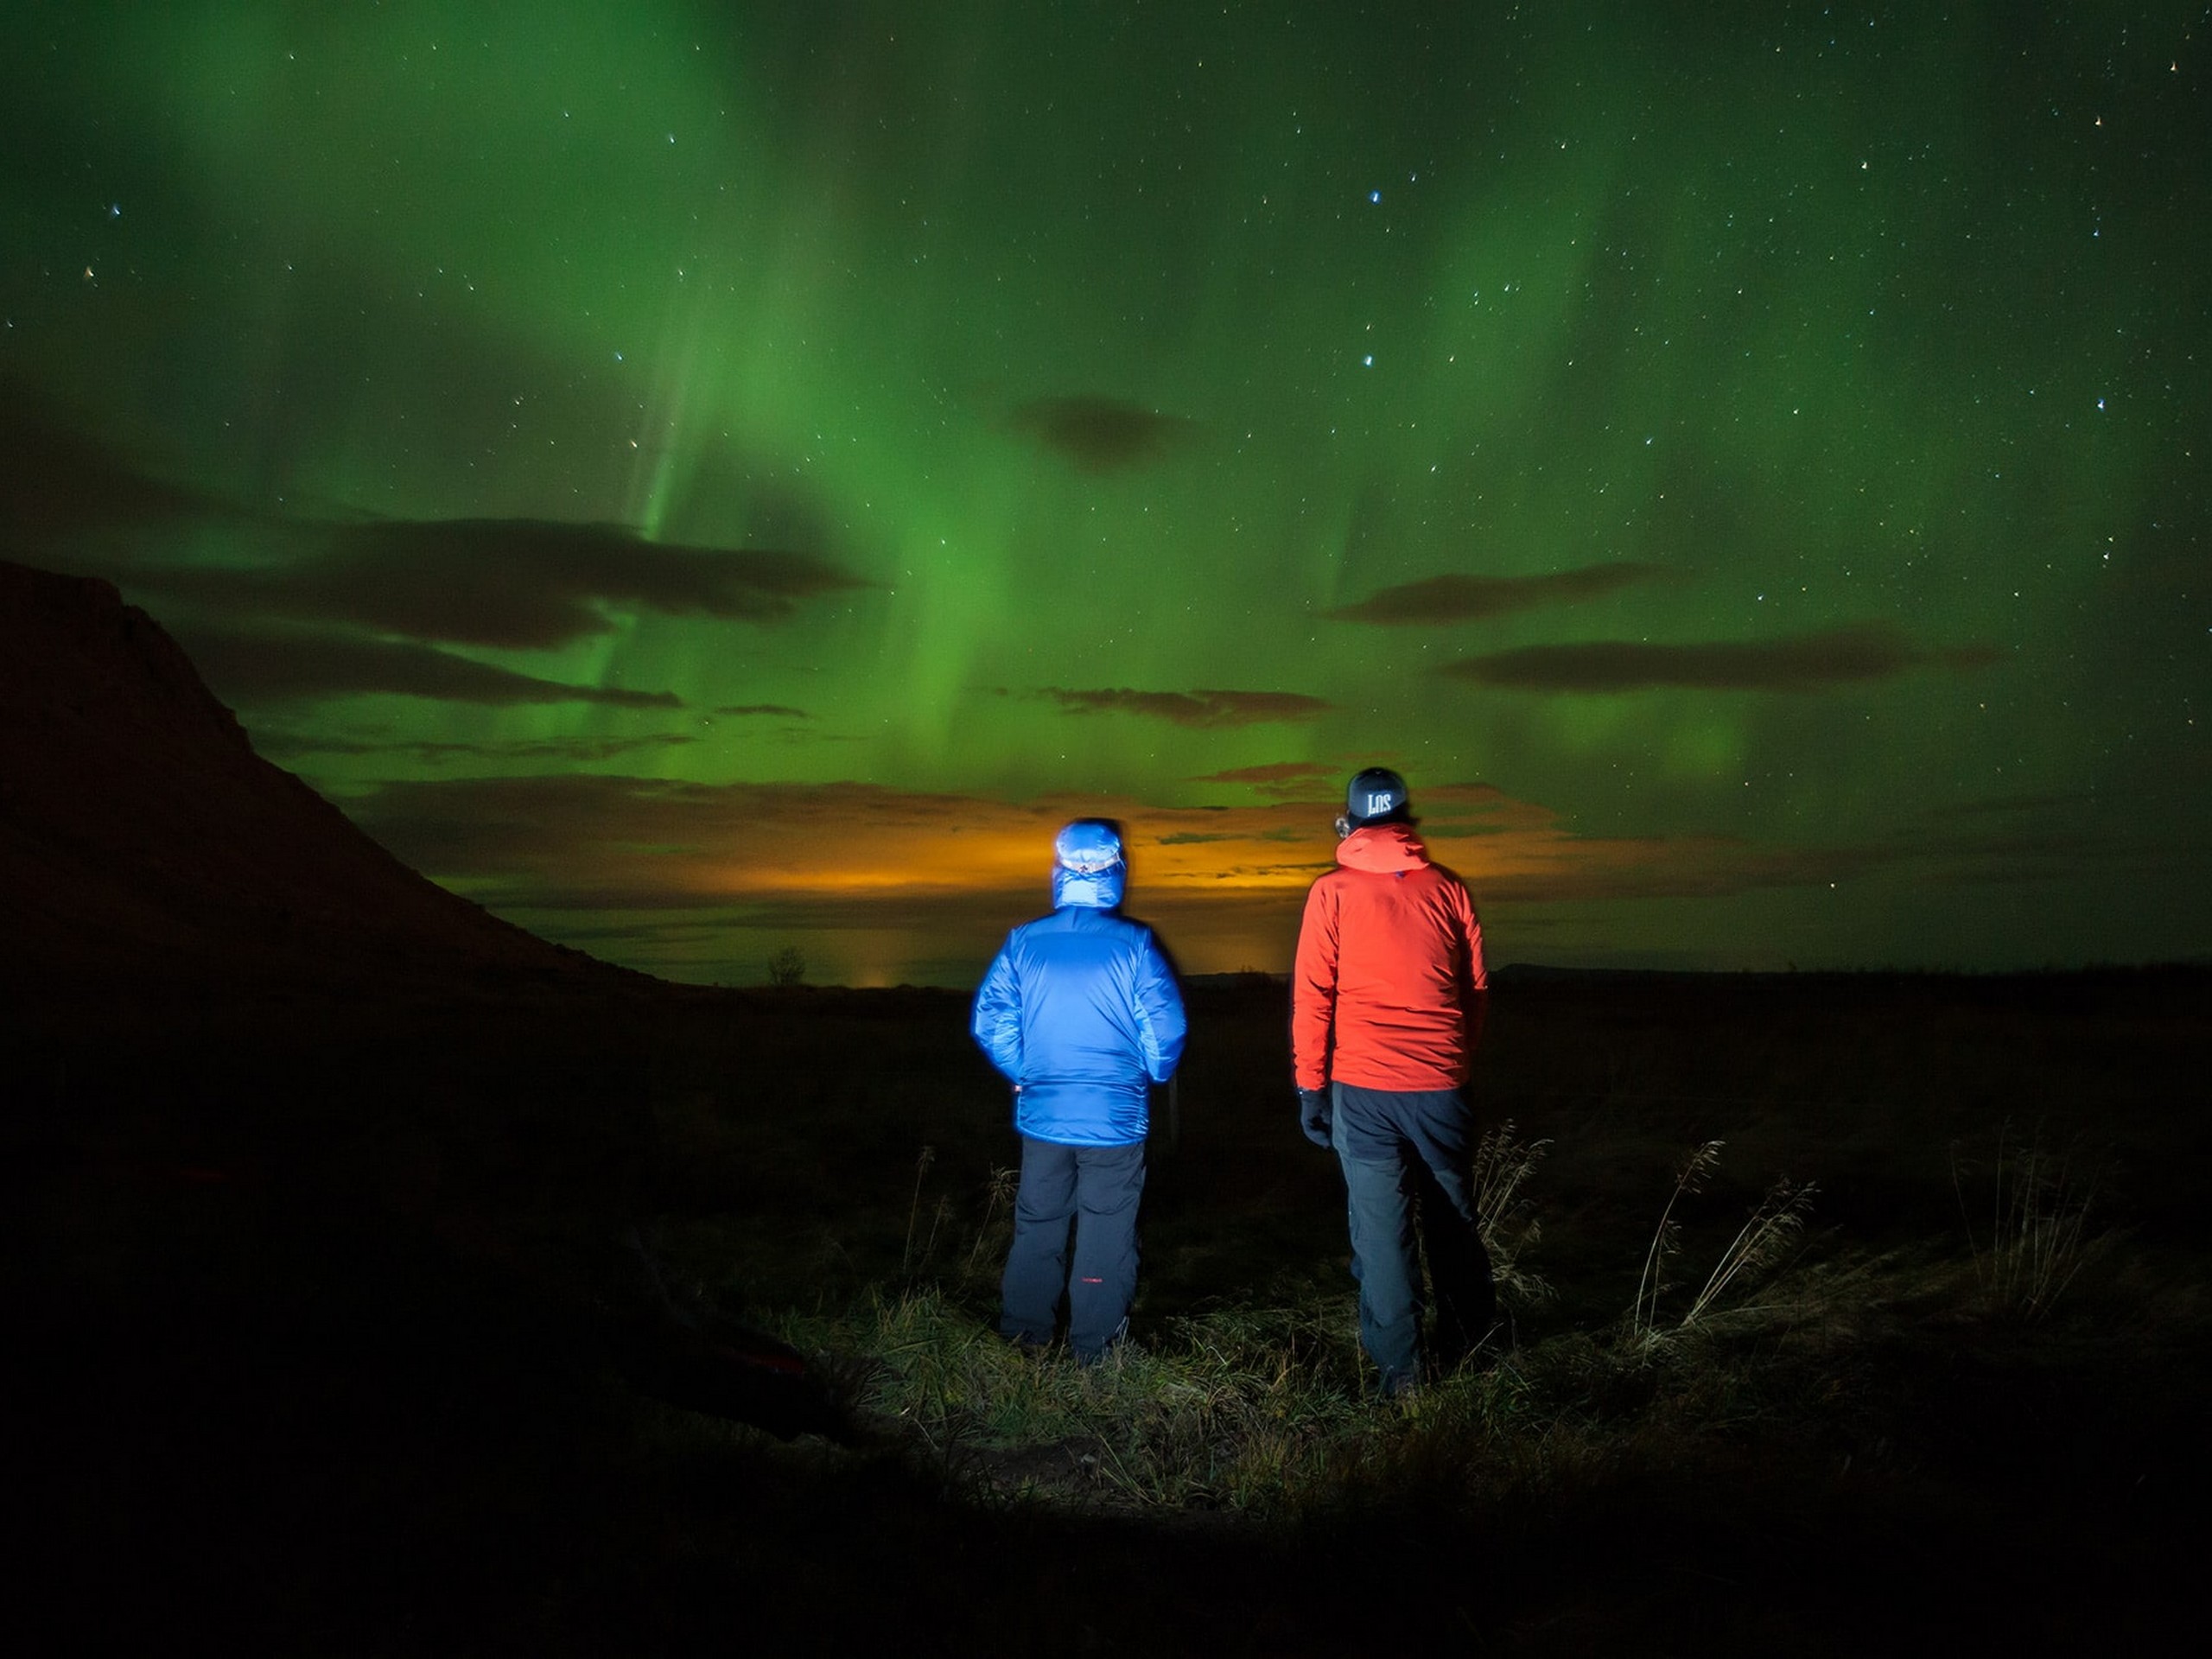 Couple enjoying the Northern Lights while on a guided tour in Iceland - Photo by Bjorgvin Hilmarsson